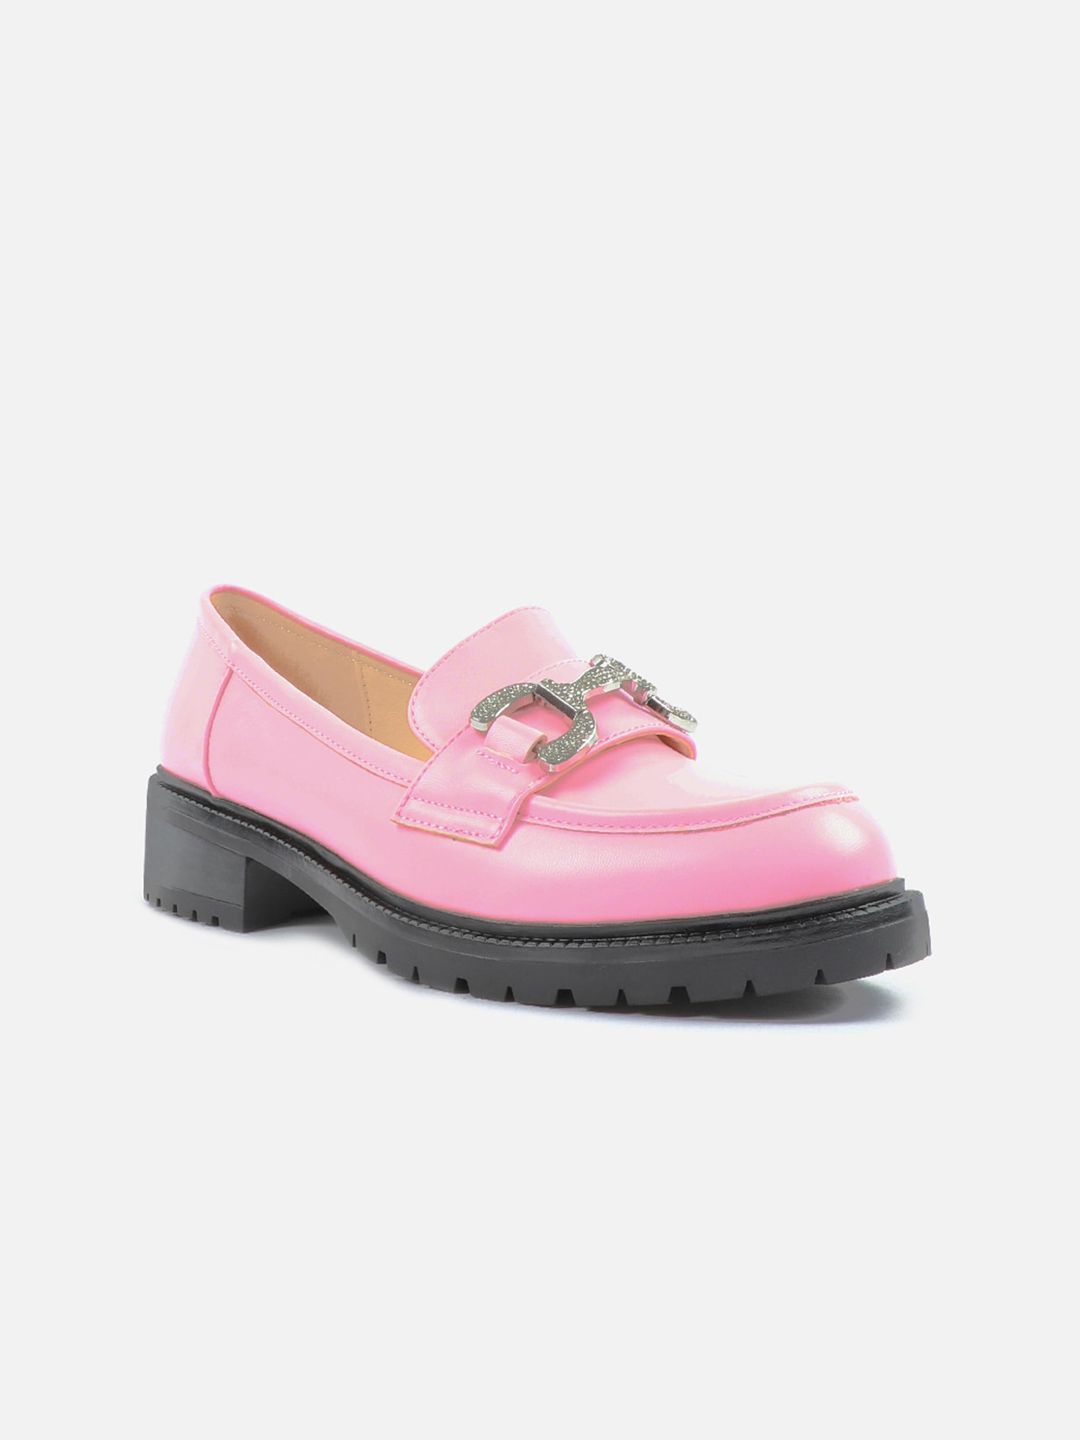 Carlton London Women Pink Solid Slip-On Casual Loafers Price in India